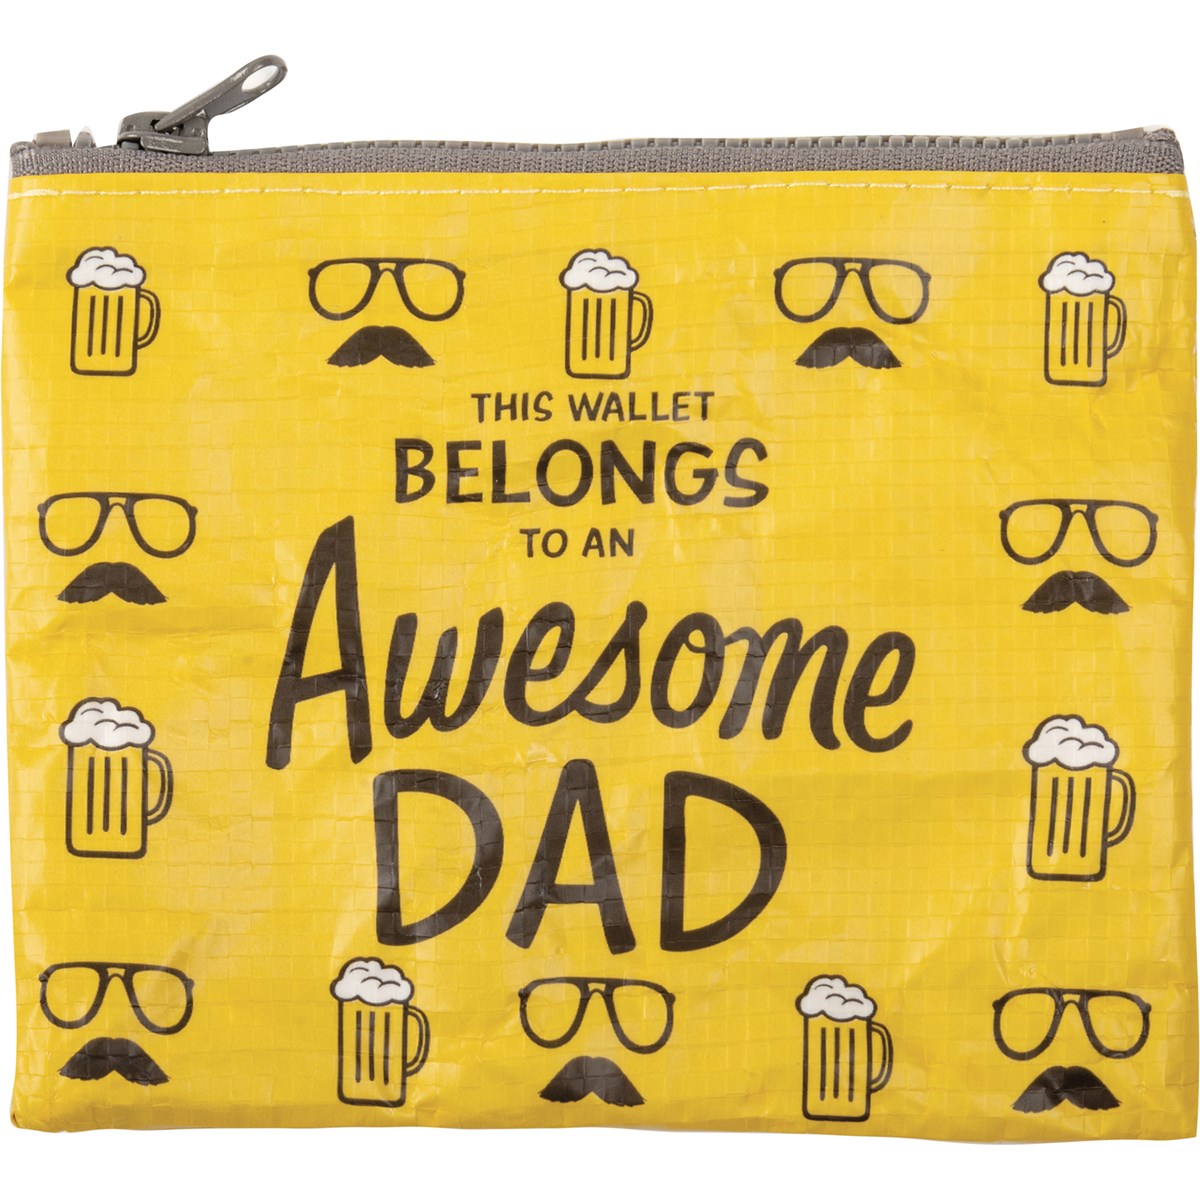 Zipper Wallet - Awesome Dad - 5.25" x 4.25" - Post-Consumer Material, Plastic, Metal